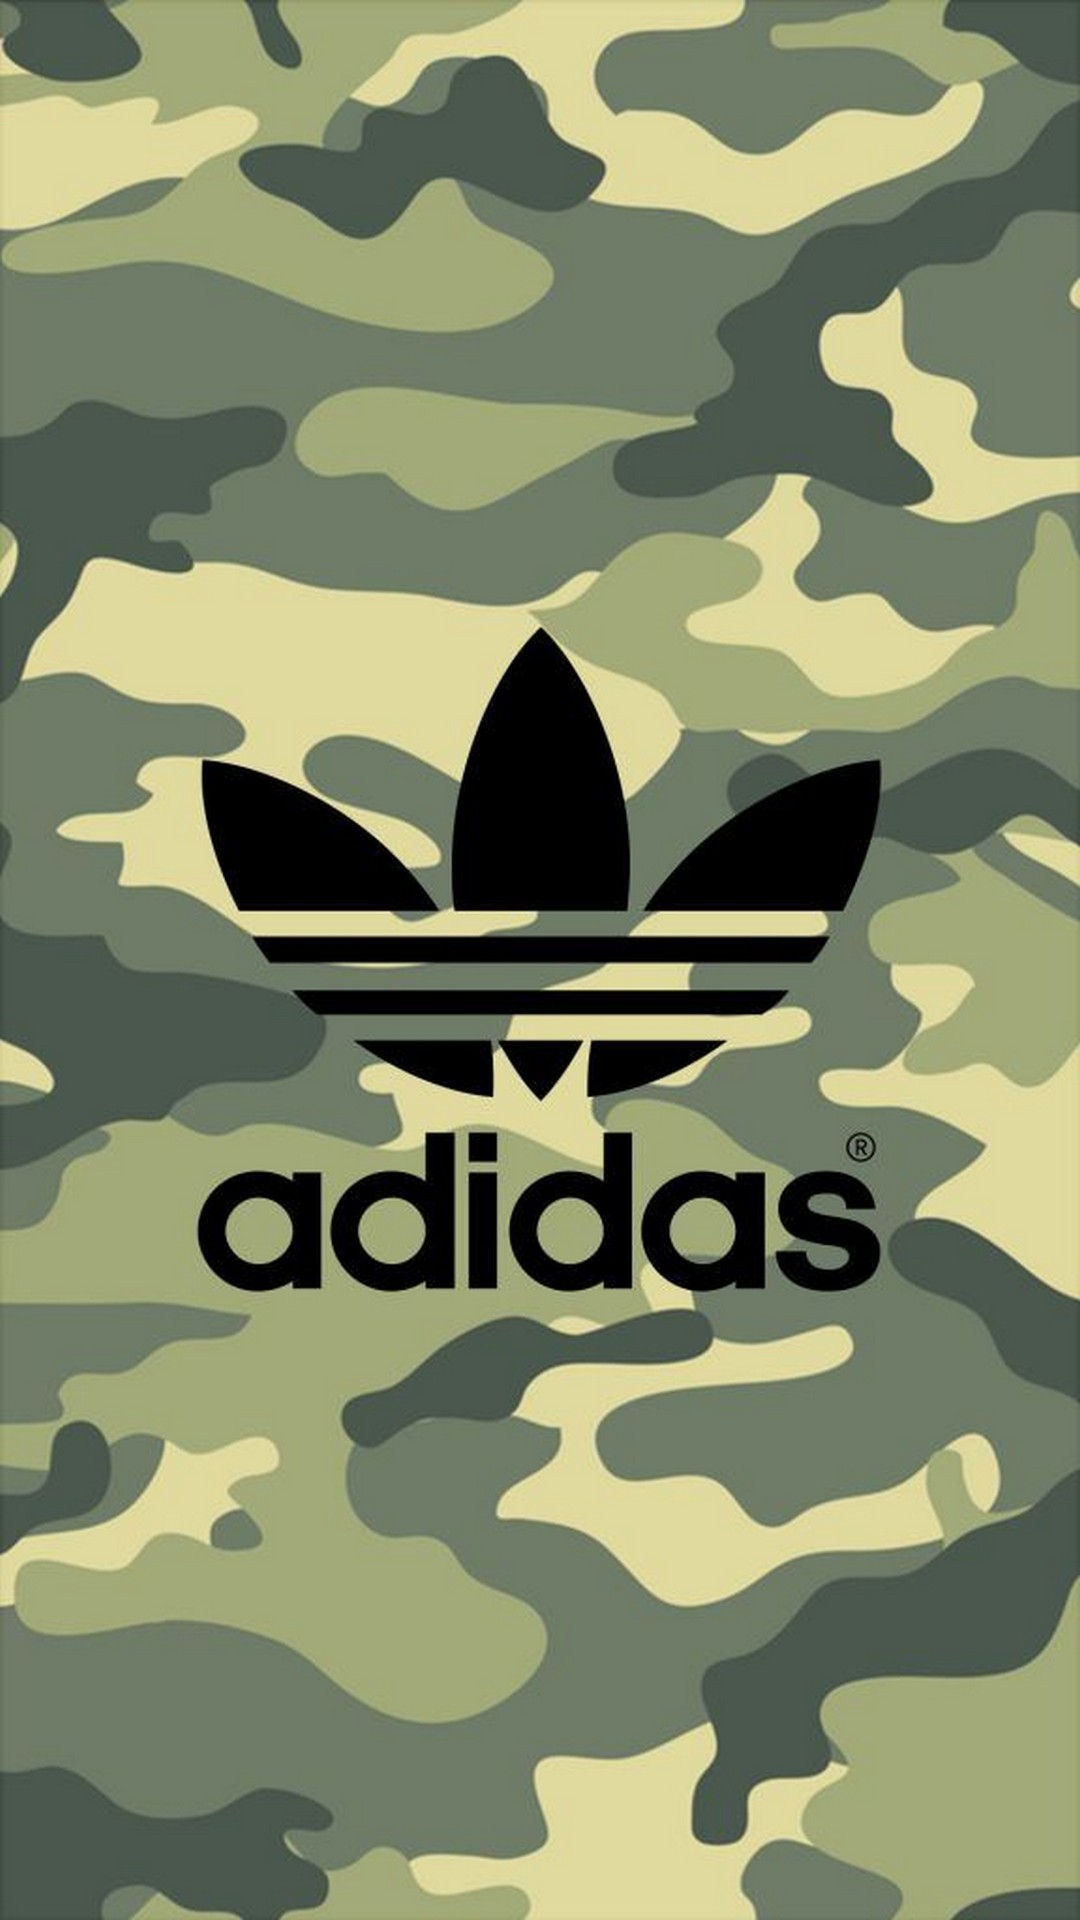 adidas wallpaper,military camouflage,pattern,illustration,design,camouflage